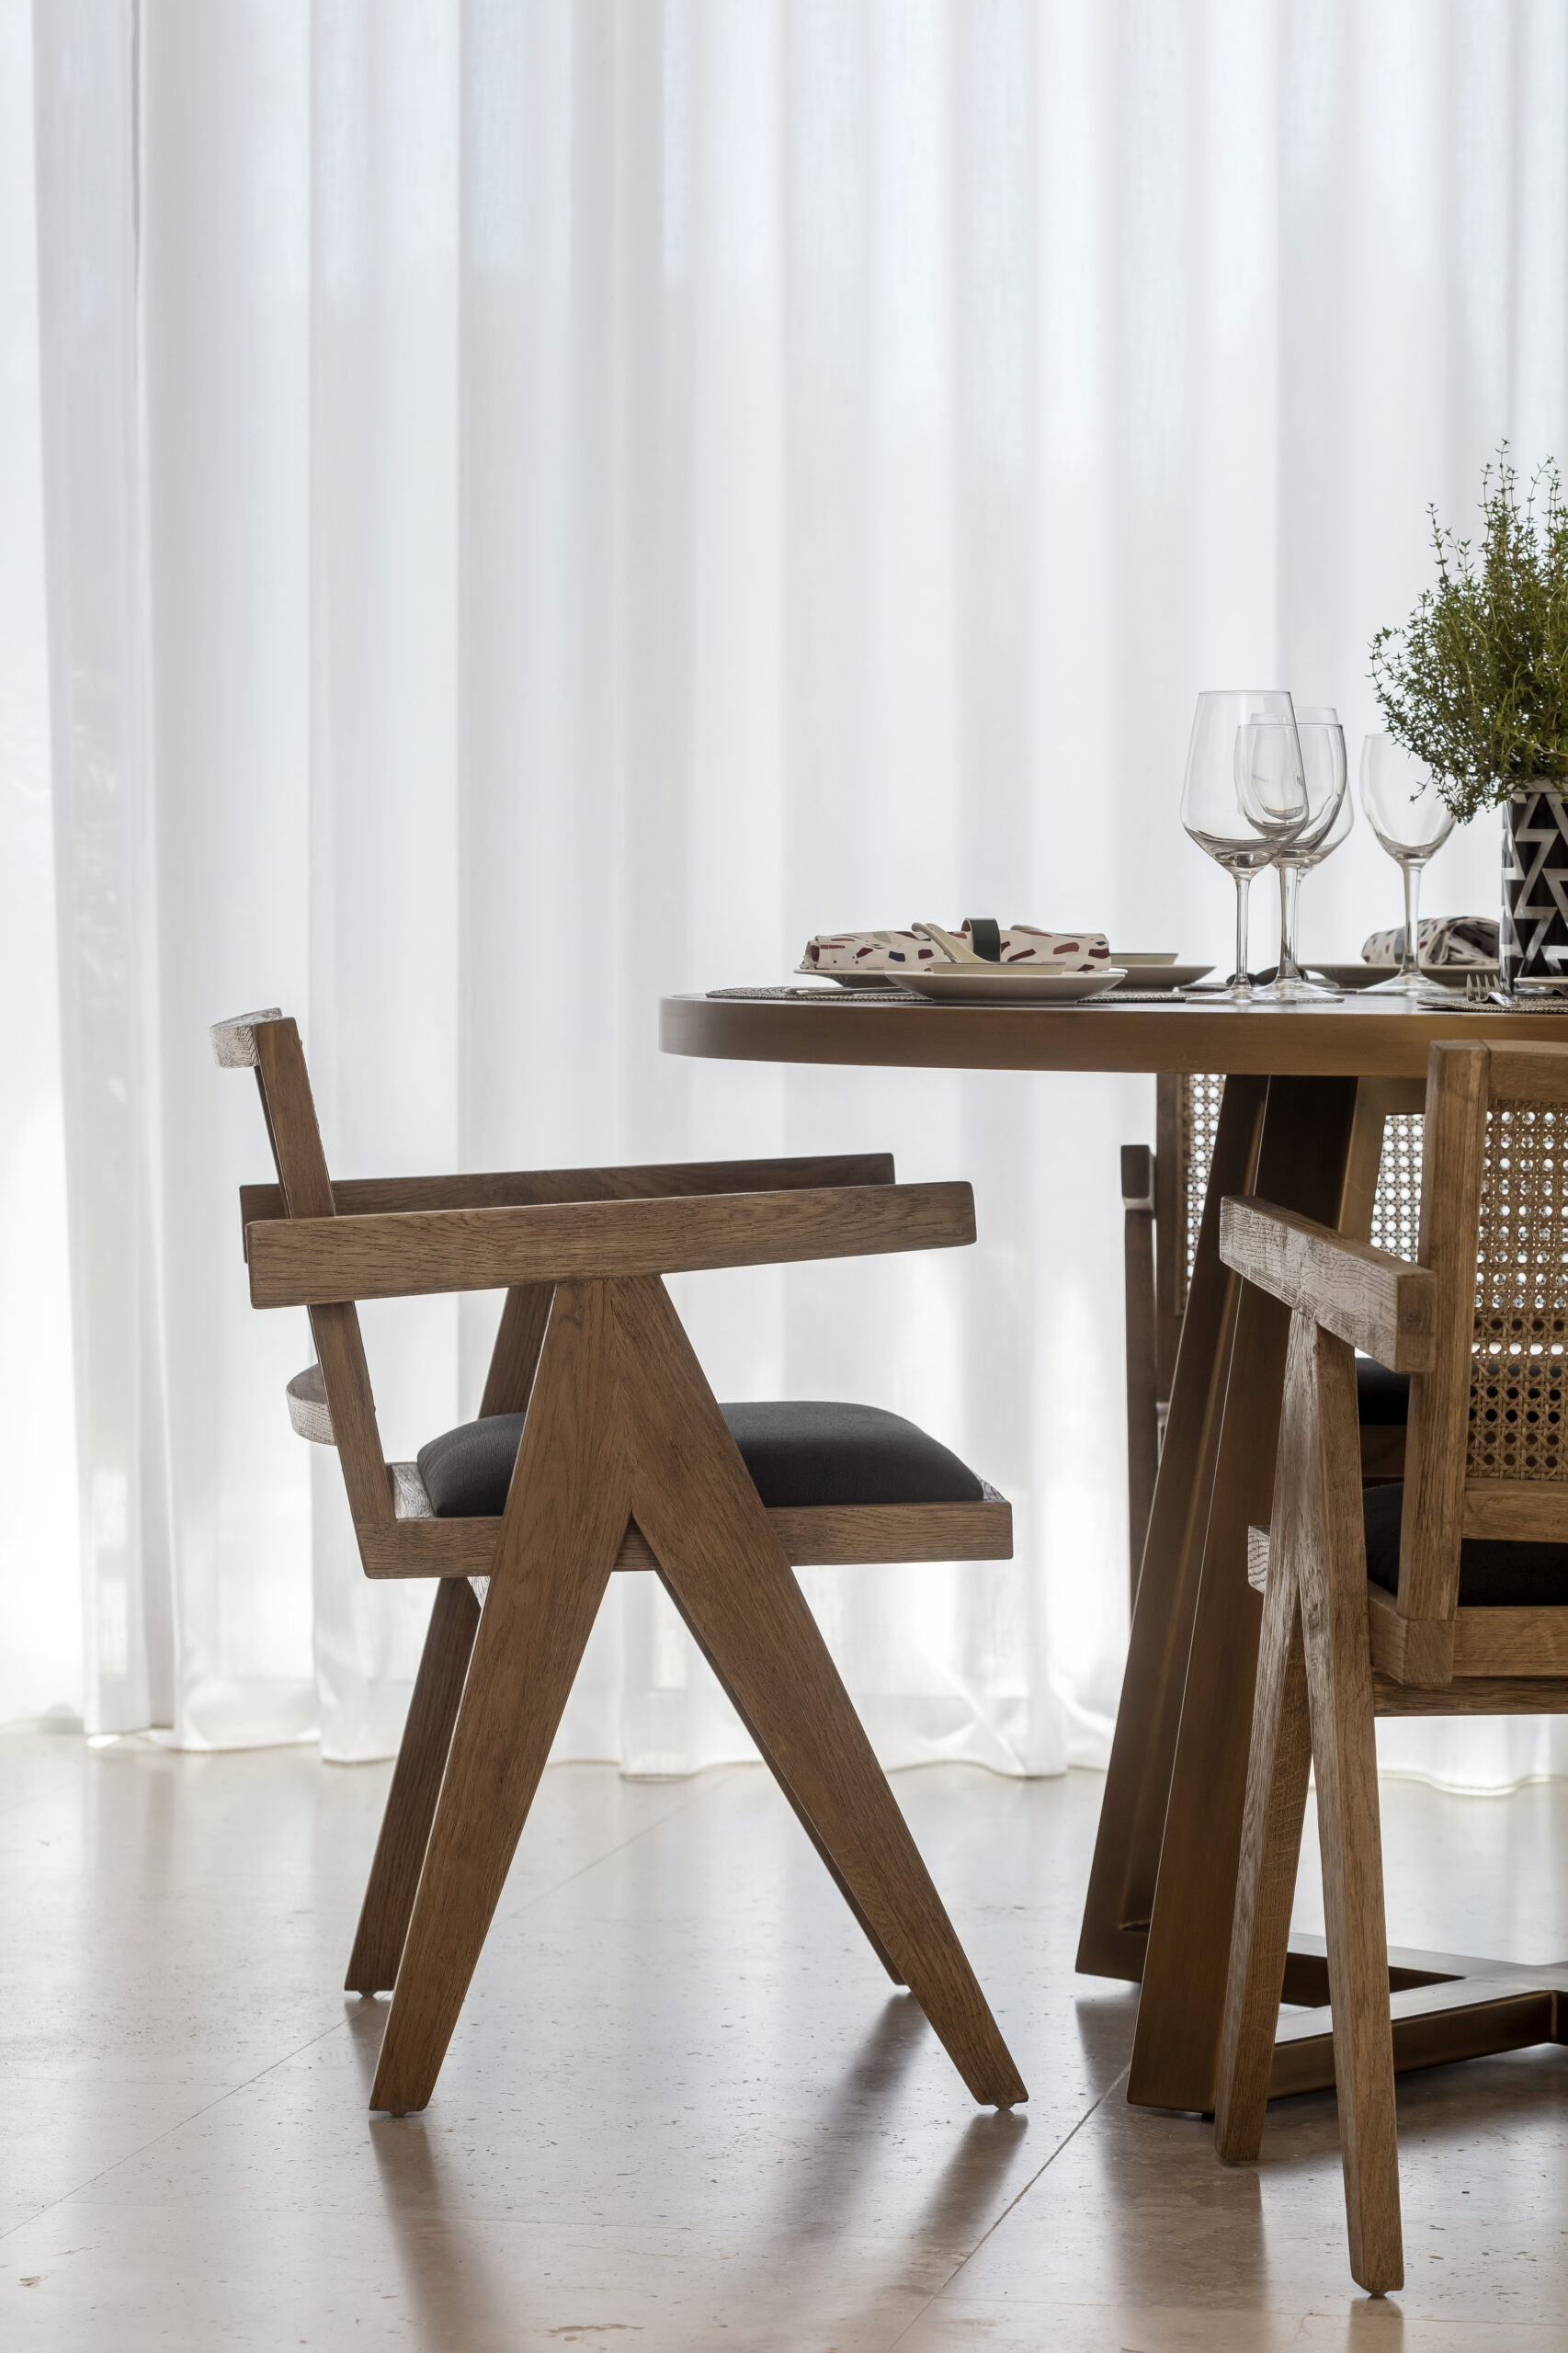 Wooden table with wooden design chairs - Originals Interiors